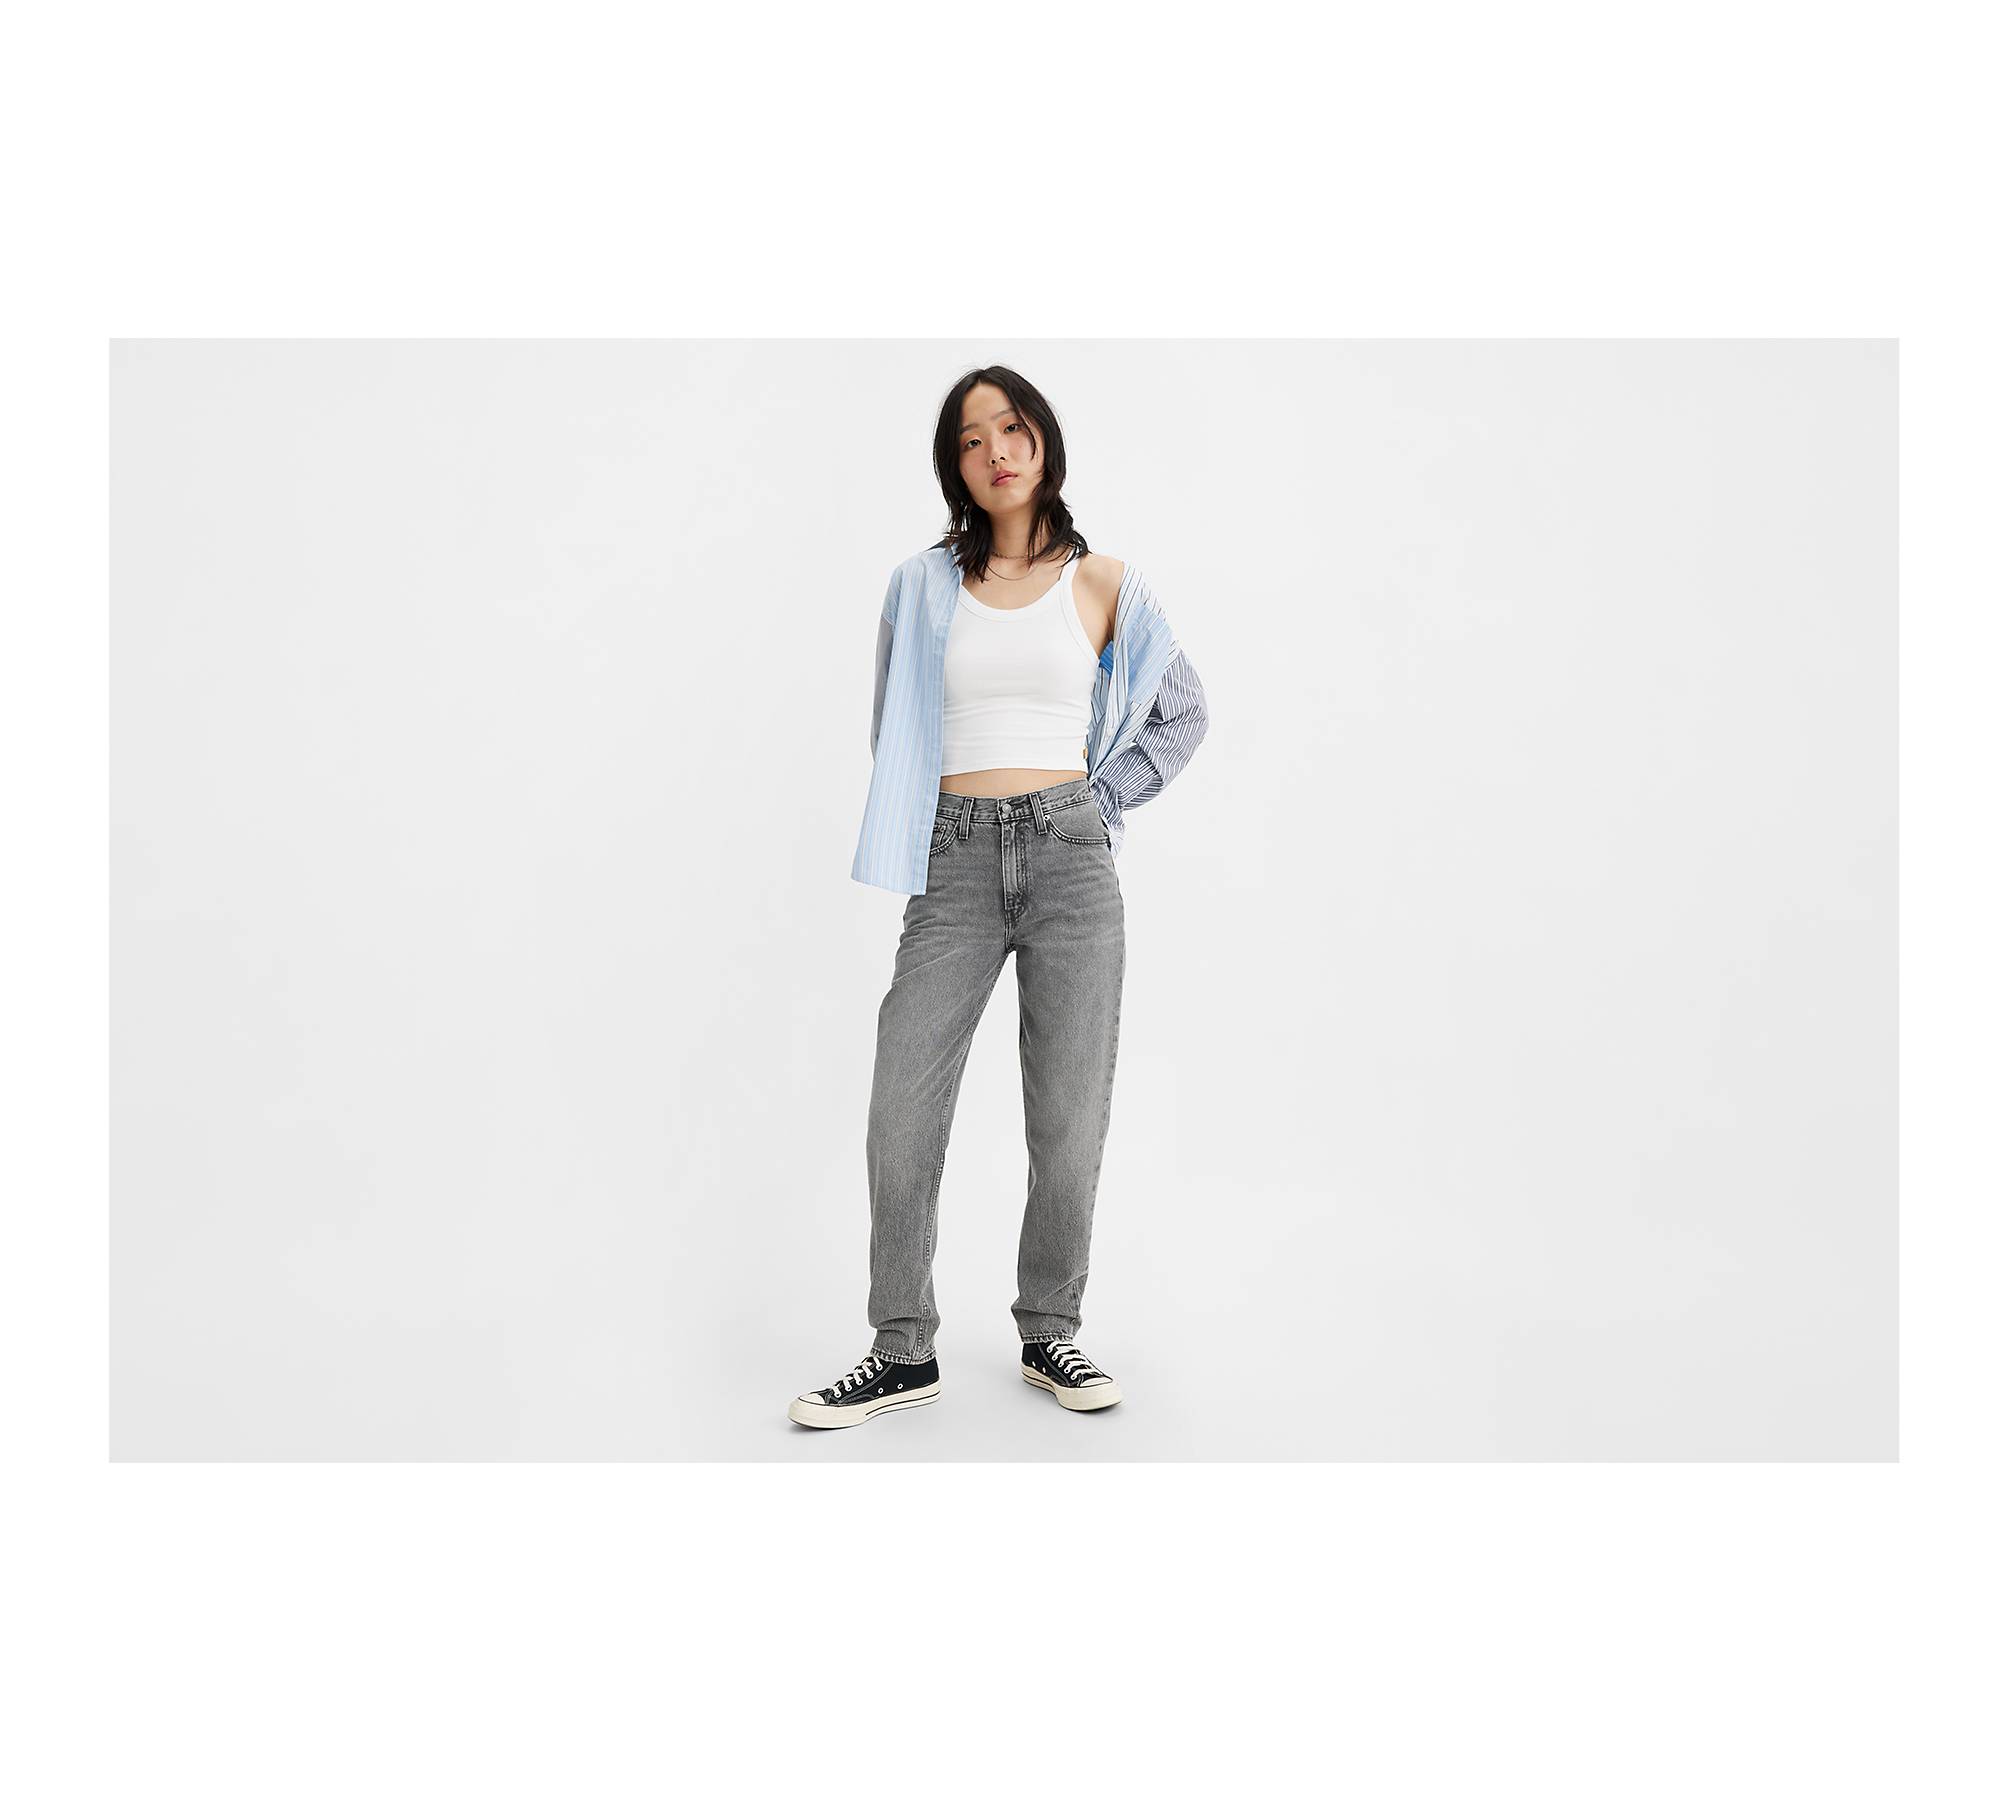 80s mom jeans - Google Search  Mom jeans, Clothes, Mom jeans outfit